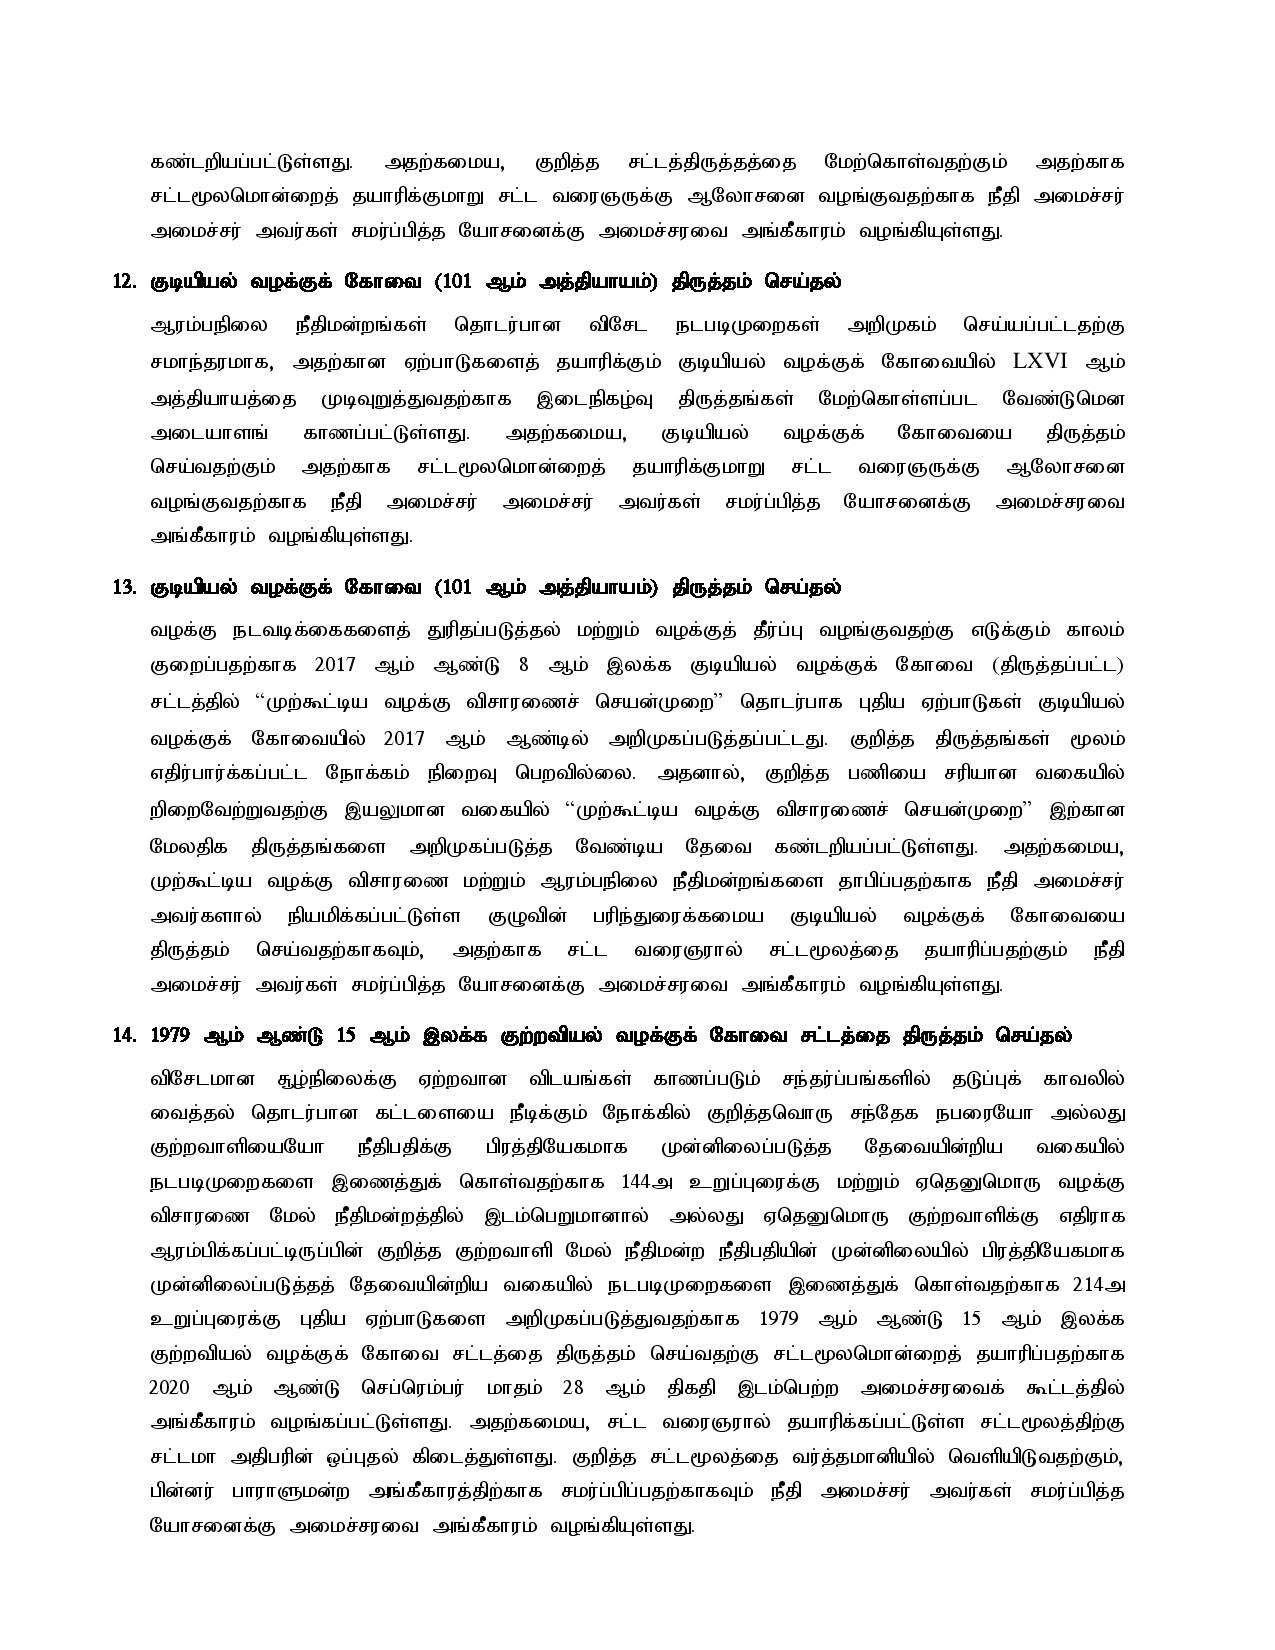 Cabinet Decisions on 27.09.2021 Tamil page 005